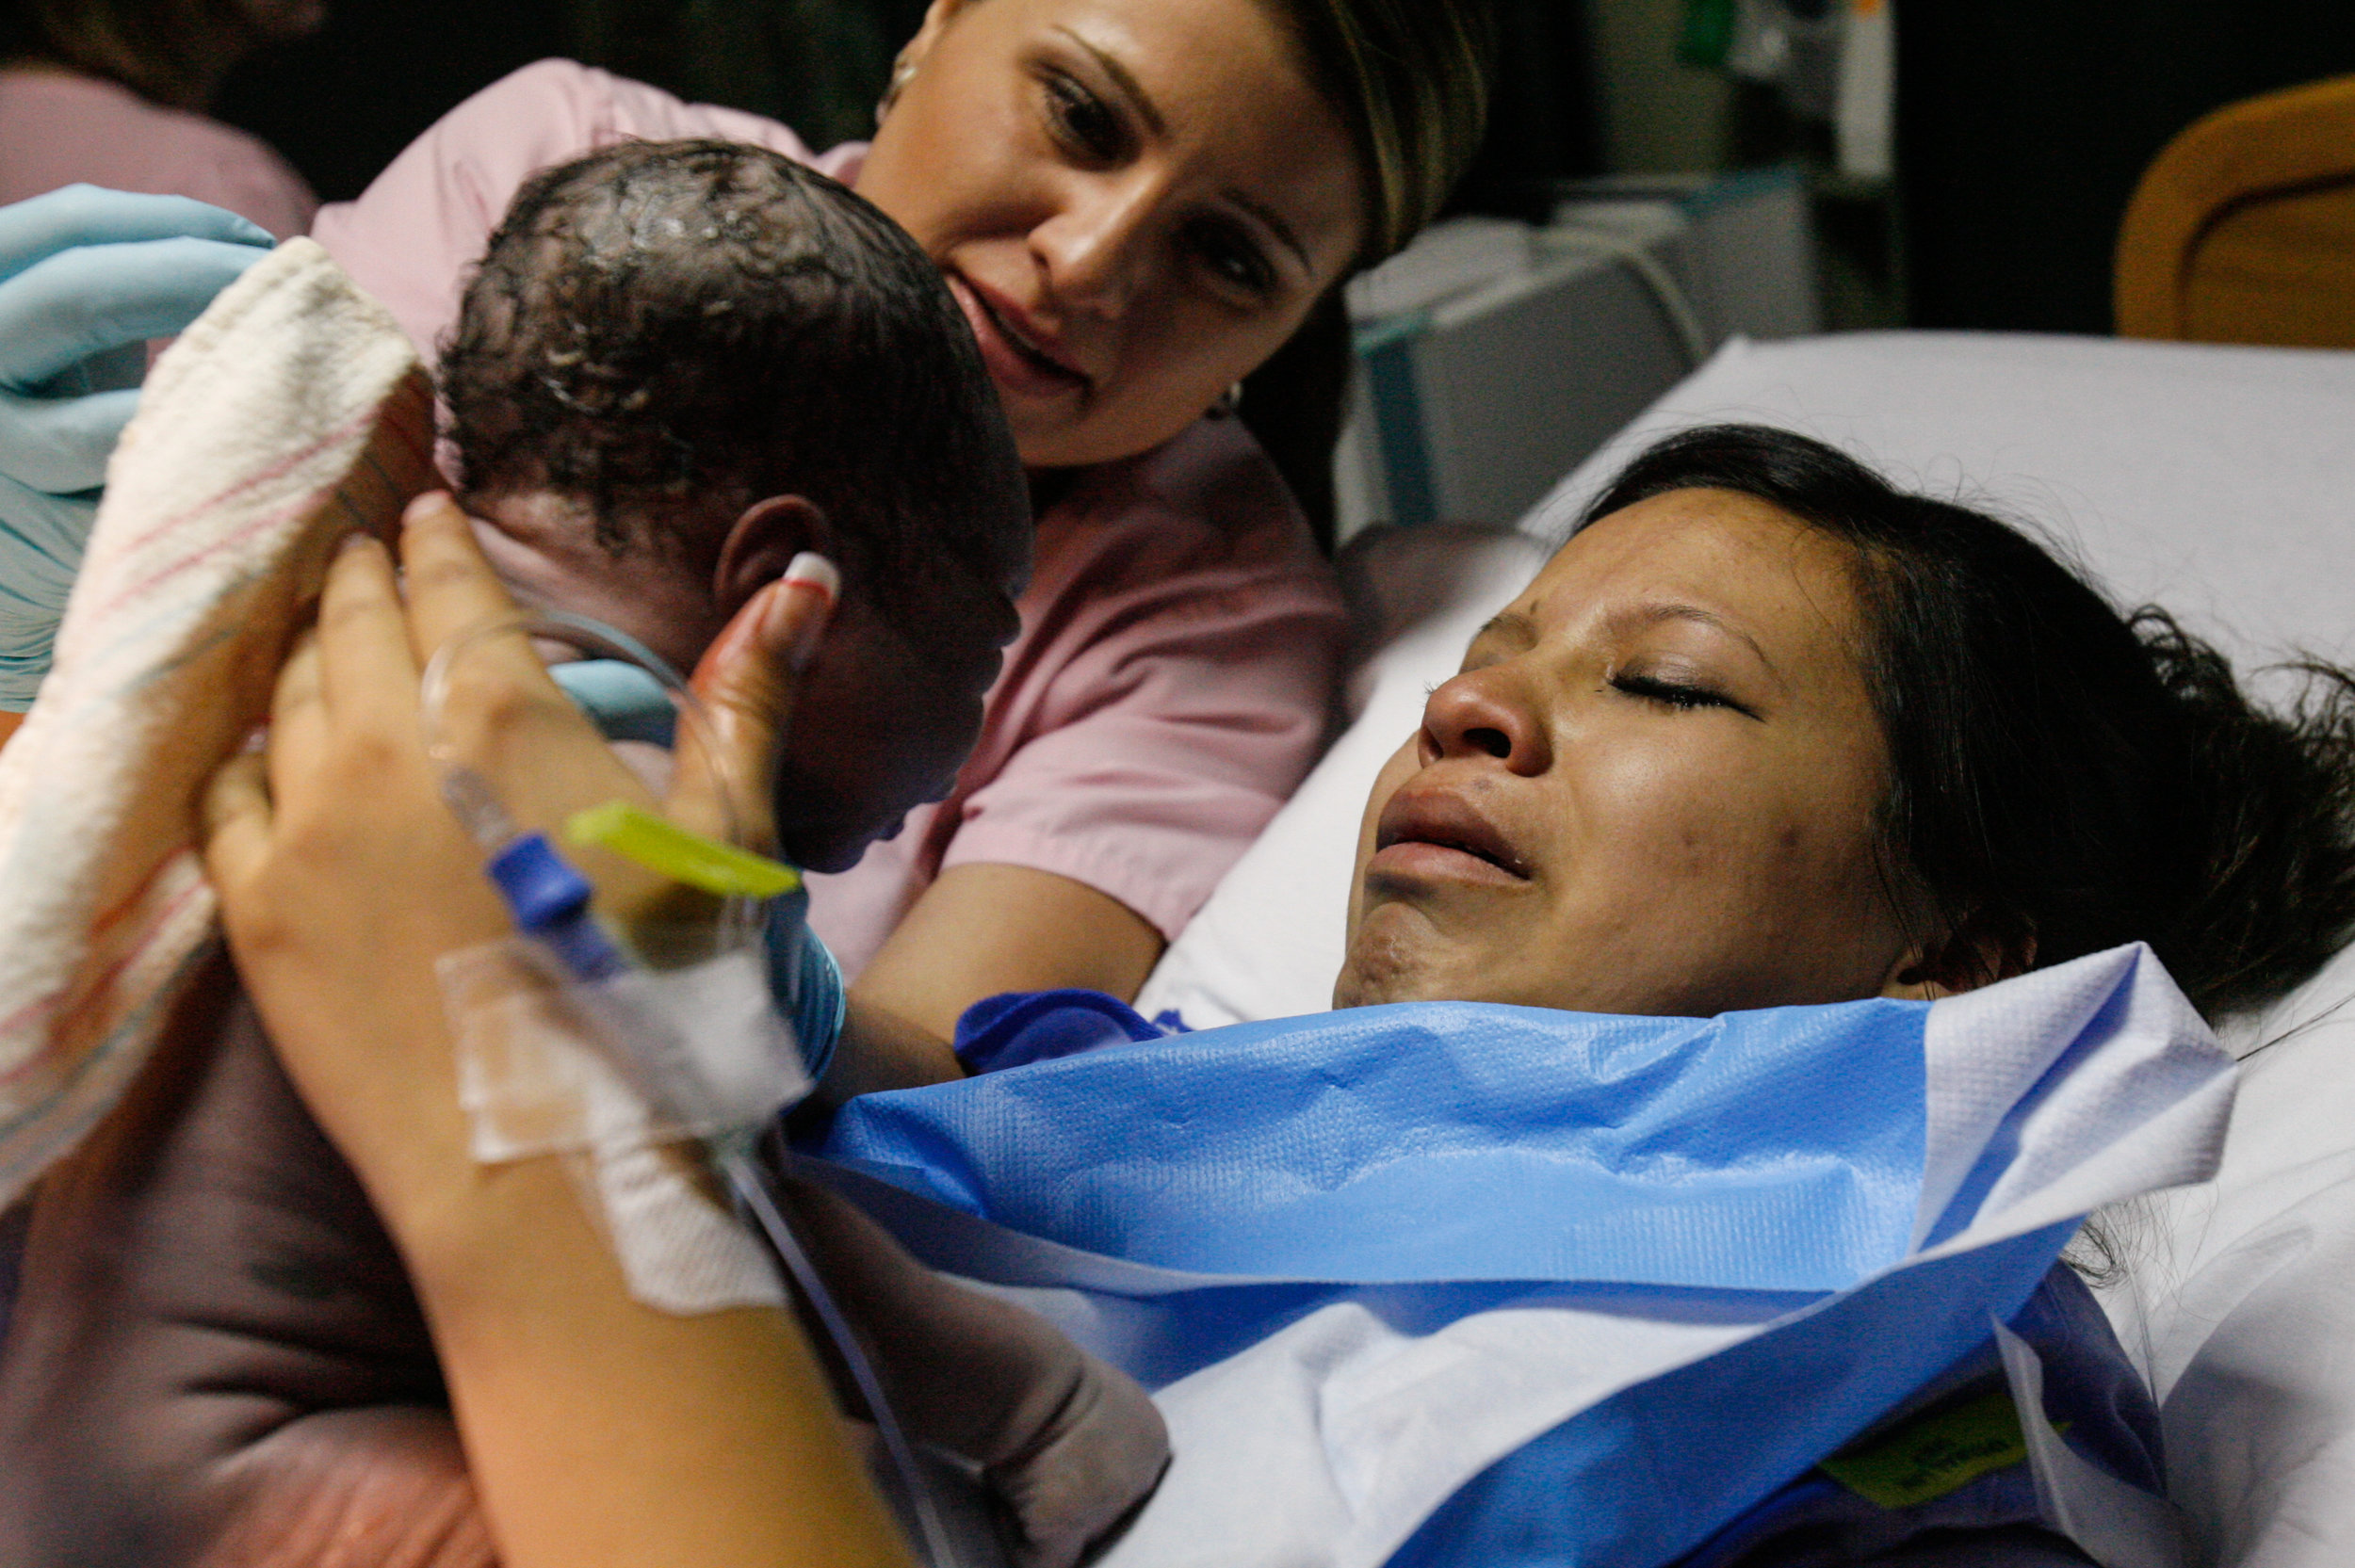  Deana Martinez, 17, right, holds her newborn, Lavon Sutton, after she delivered May 21, 2008, at Medical Center Hospital in Odessa, Texas. With Martinez is registered nurse Kasey Birchfield, who helped her through the labor and delivery. 